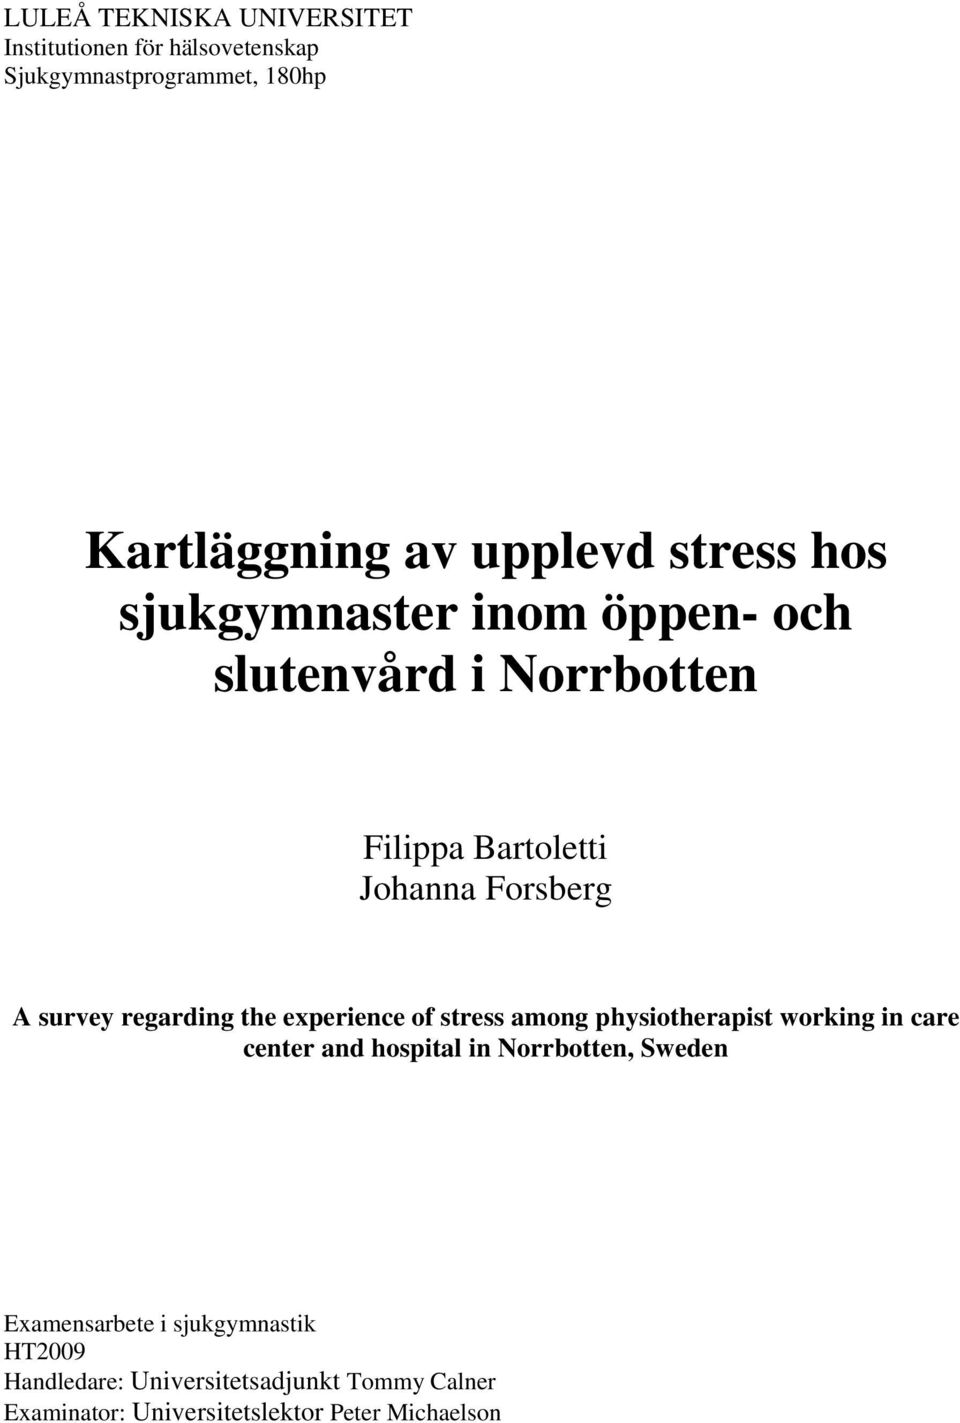 regarding the experience of stress among physiotherapist working in care center and hospital in Norrbotten, Sweden